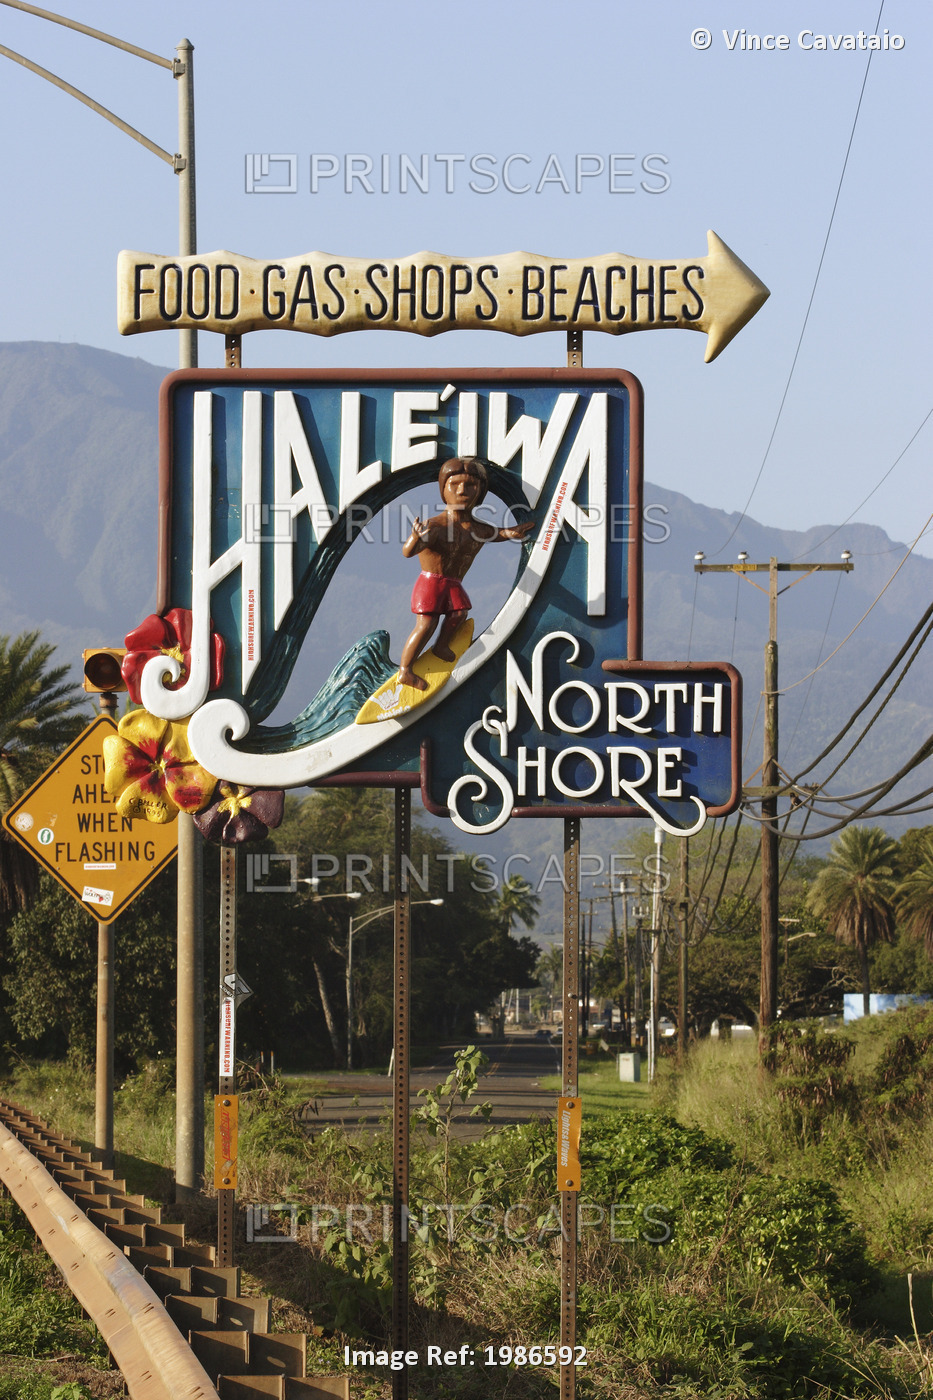 Welcome Sign For The Town Of Haleiwa; Oahu, Hawaii, United States Of America